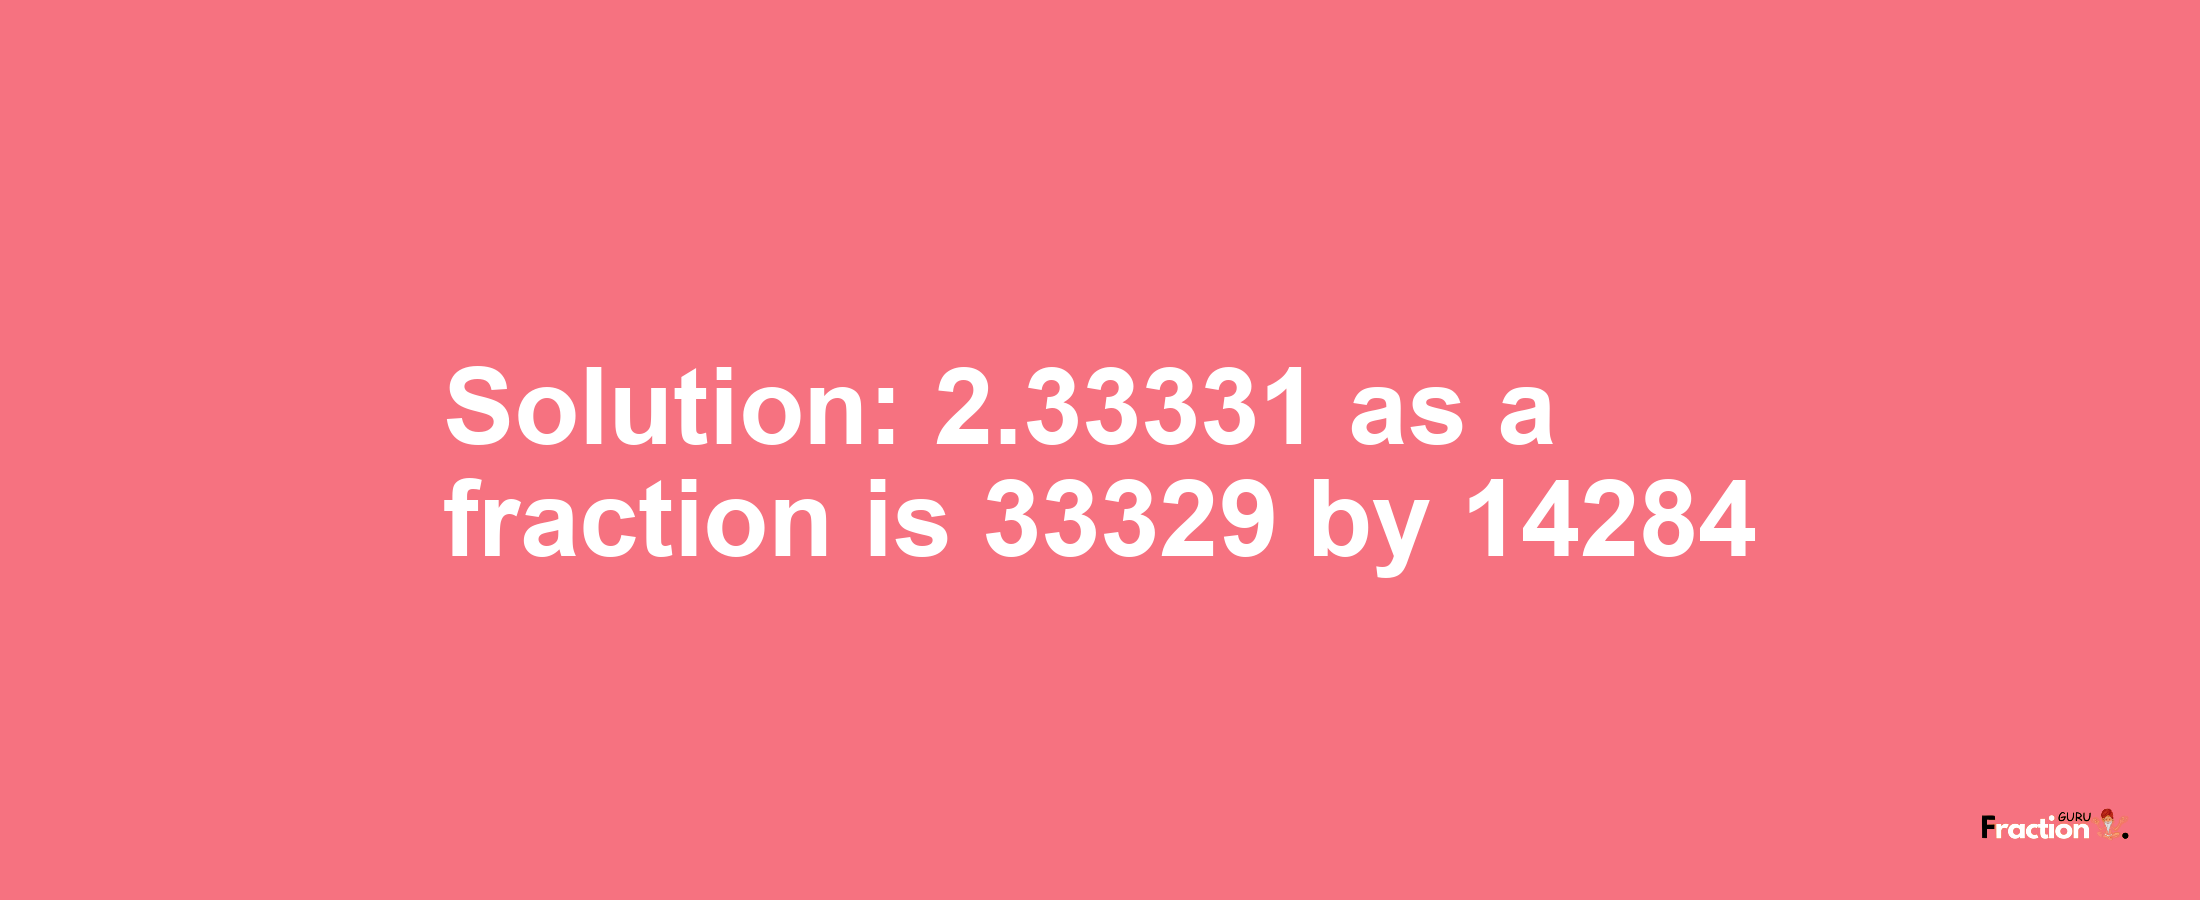 Solution:2.33331 as a fraction is 33329/14284